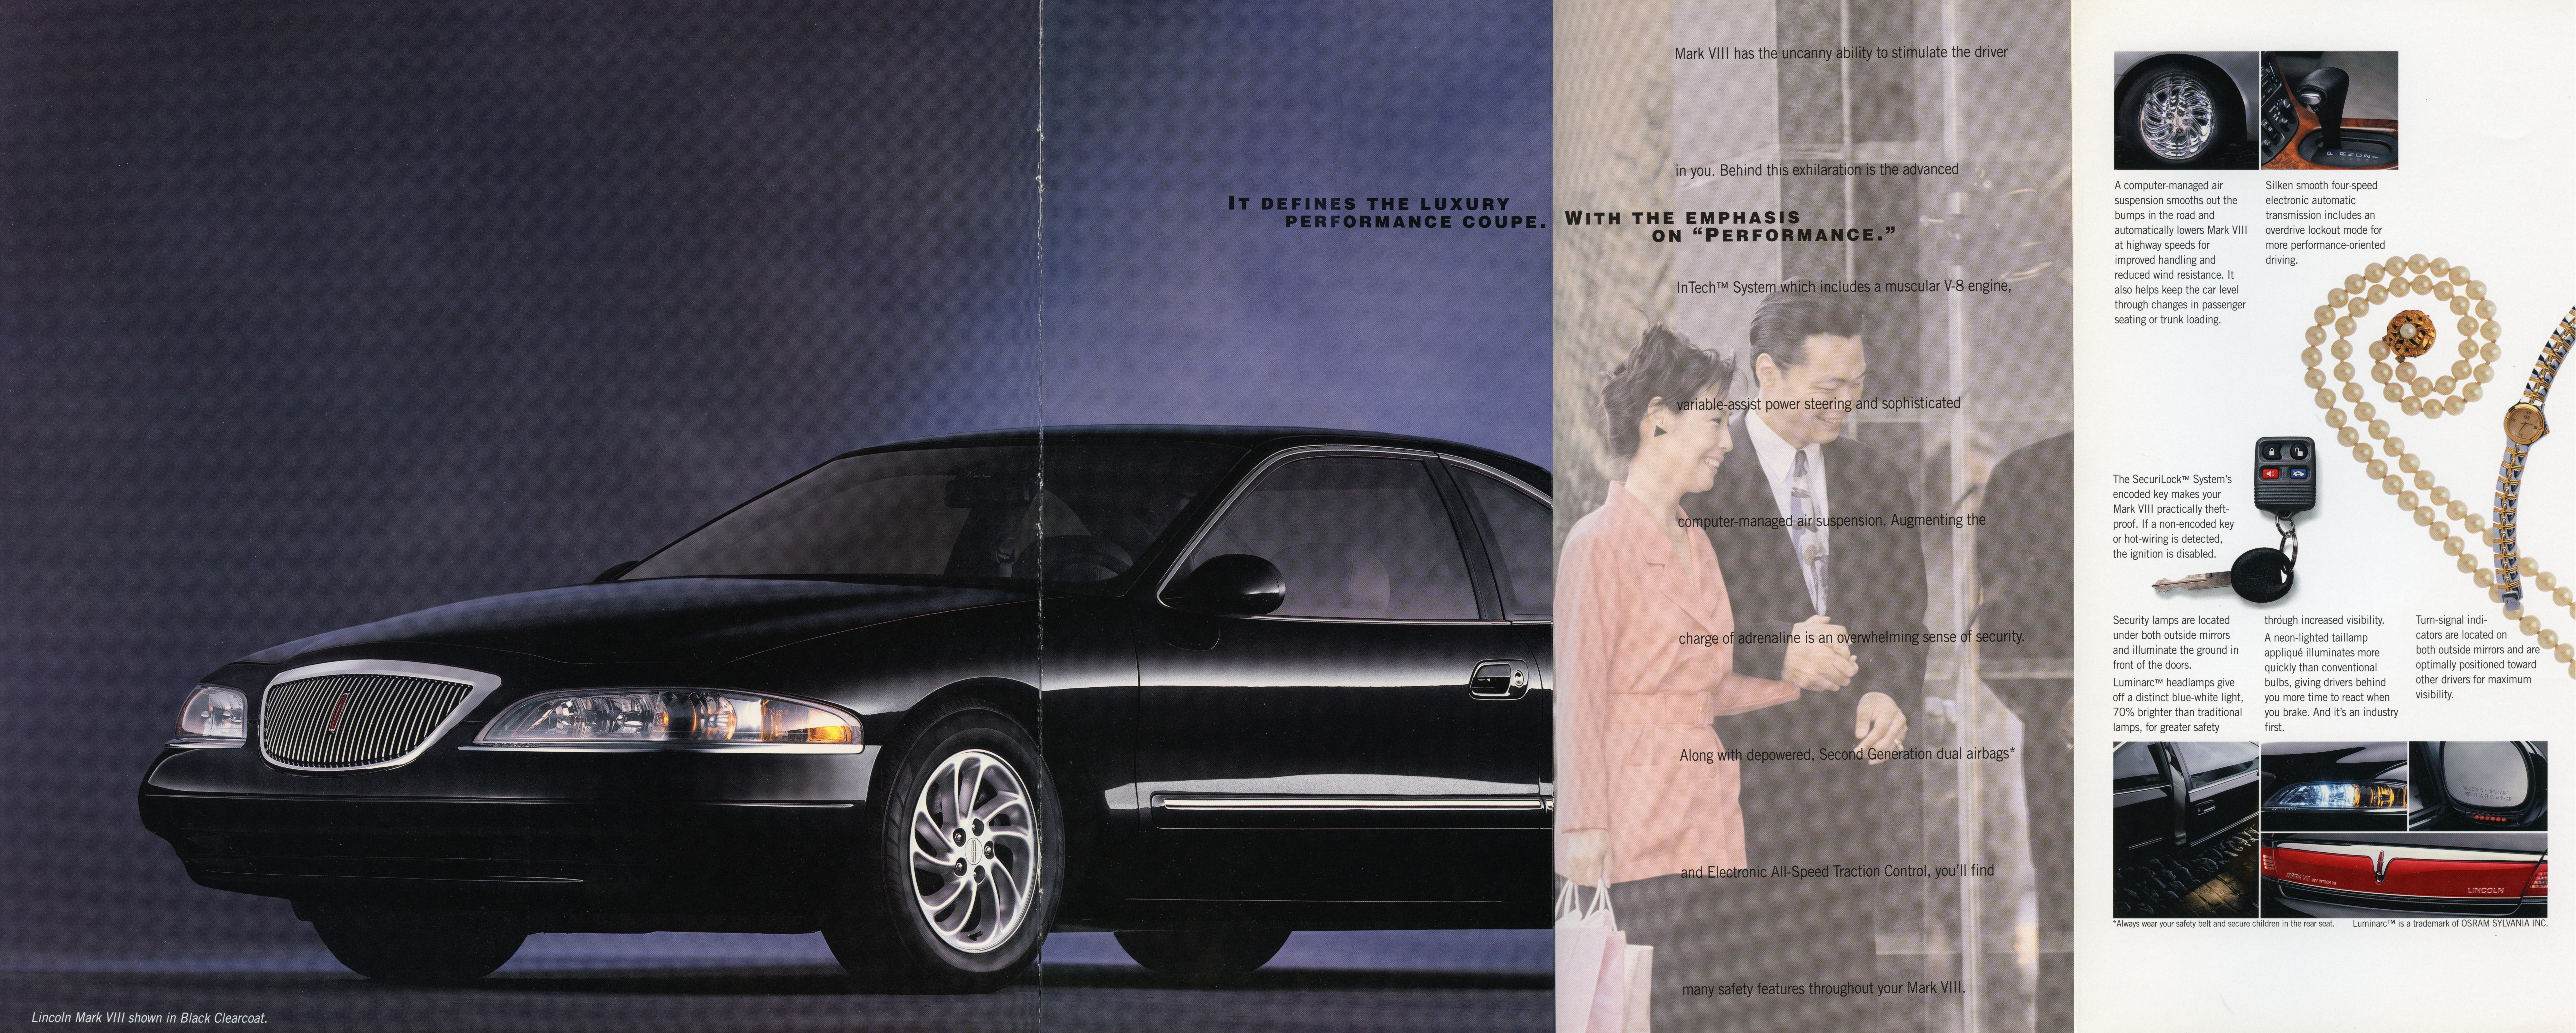 1998LincolnMarkVIII-Page5-6-Foldout